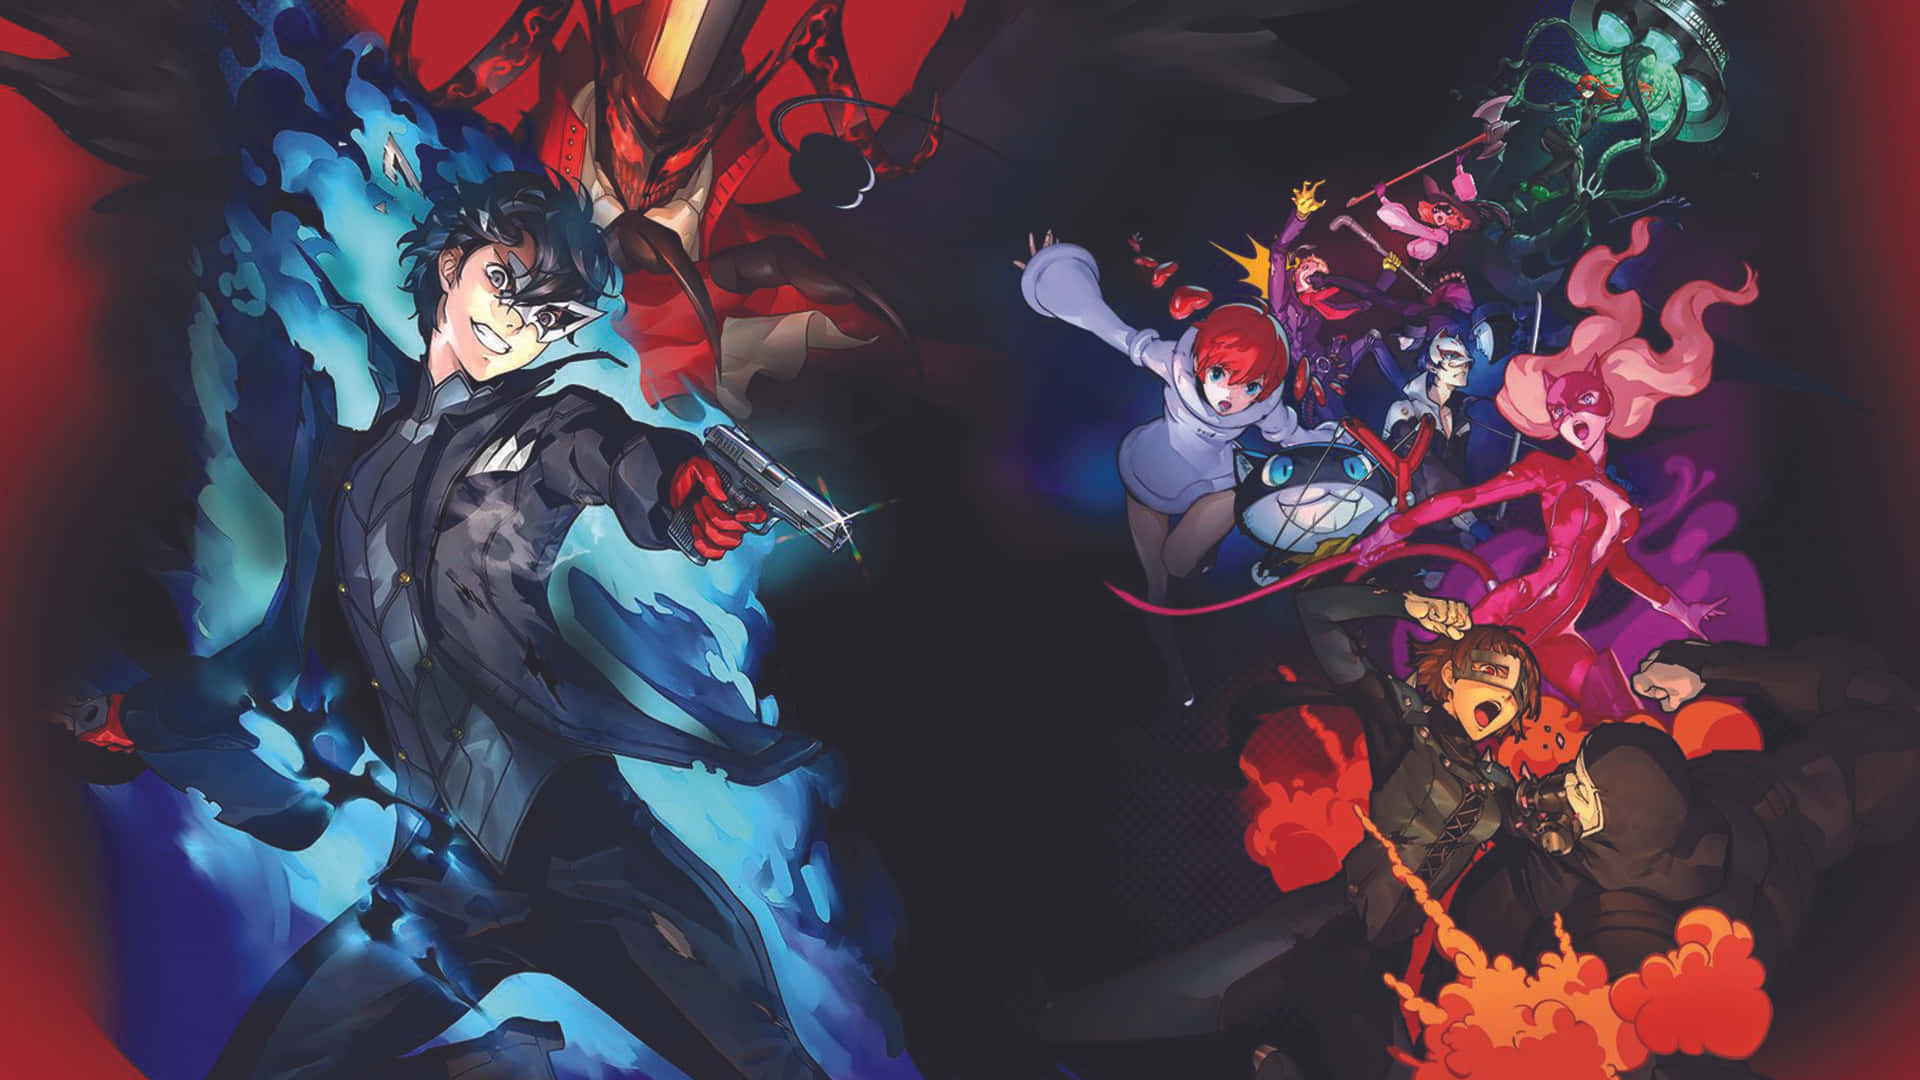 Persona 5 Strikers - The Phantom Thieves in Action Wallpaper